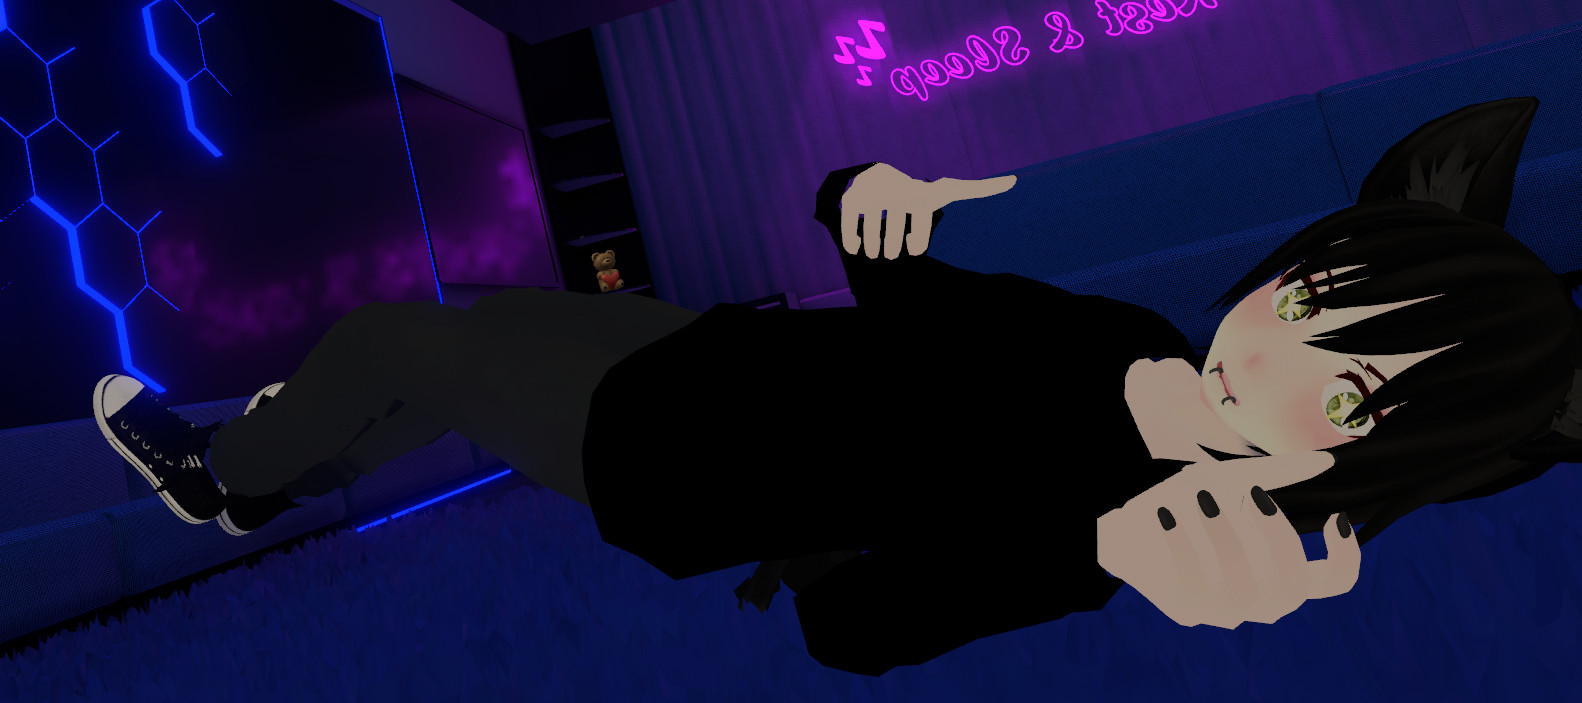 Laying down in VR